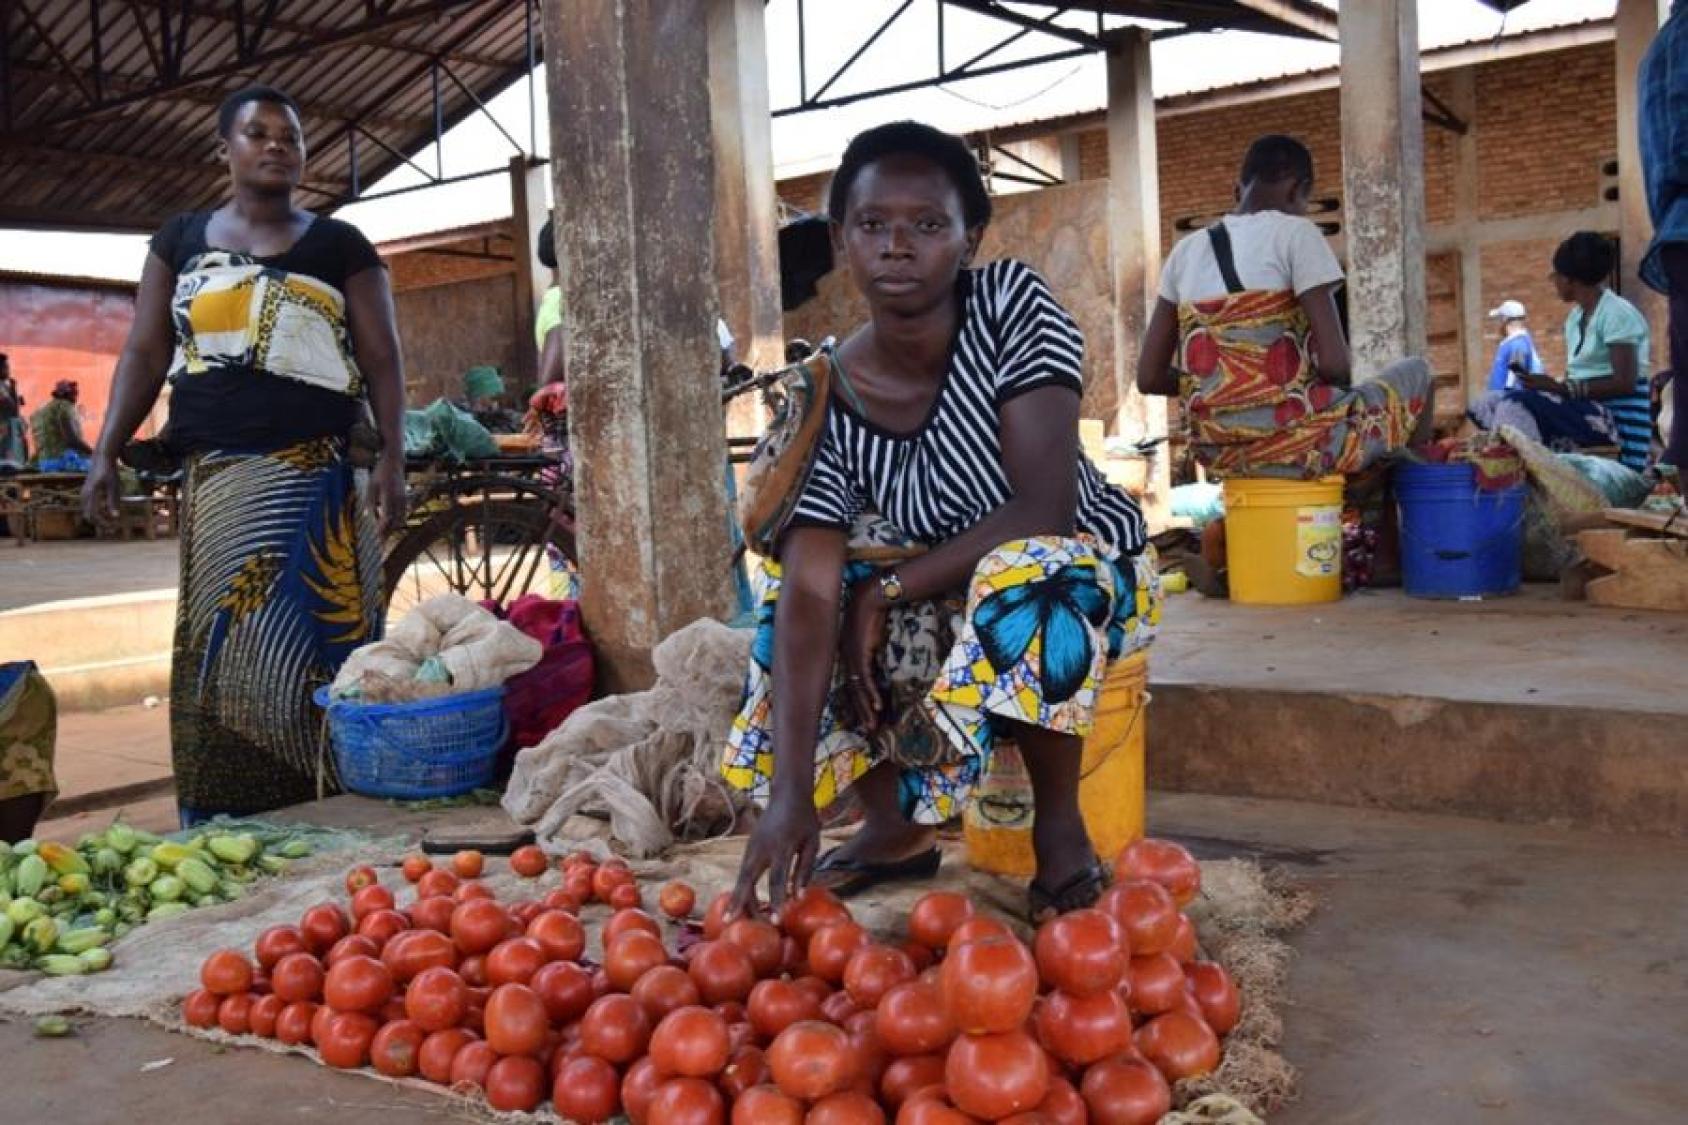 A woman sitting on a bucket sells tomatoes in a market hall